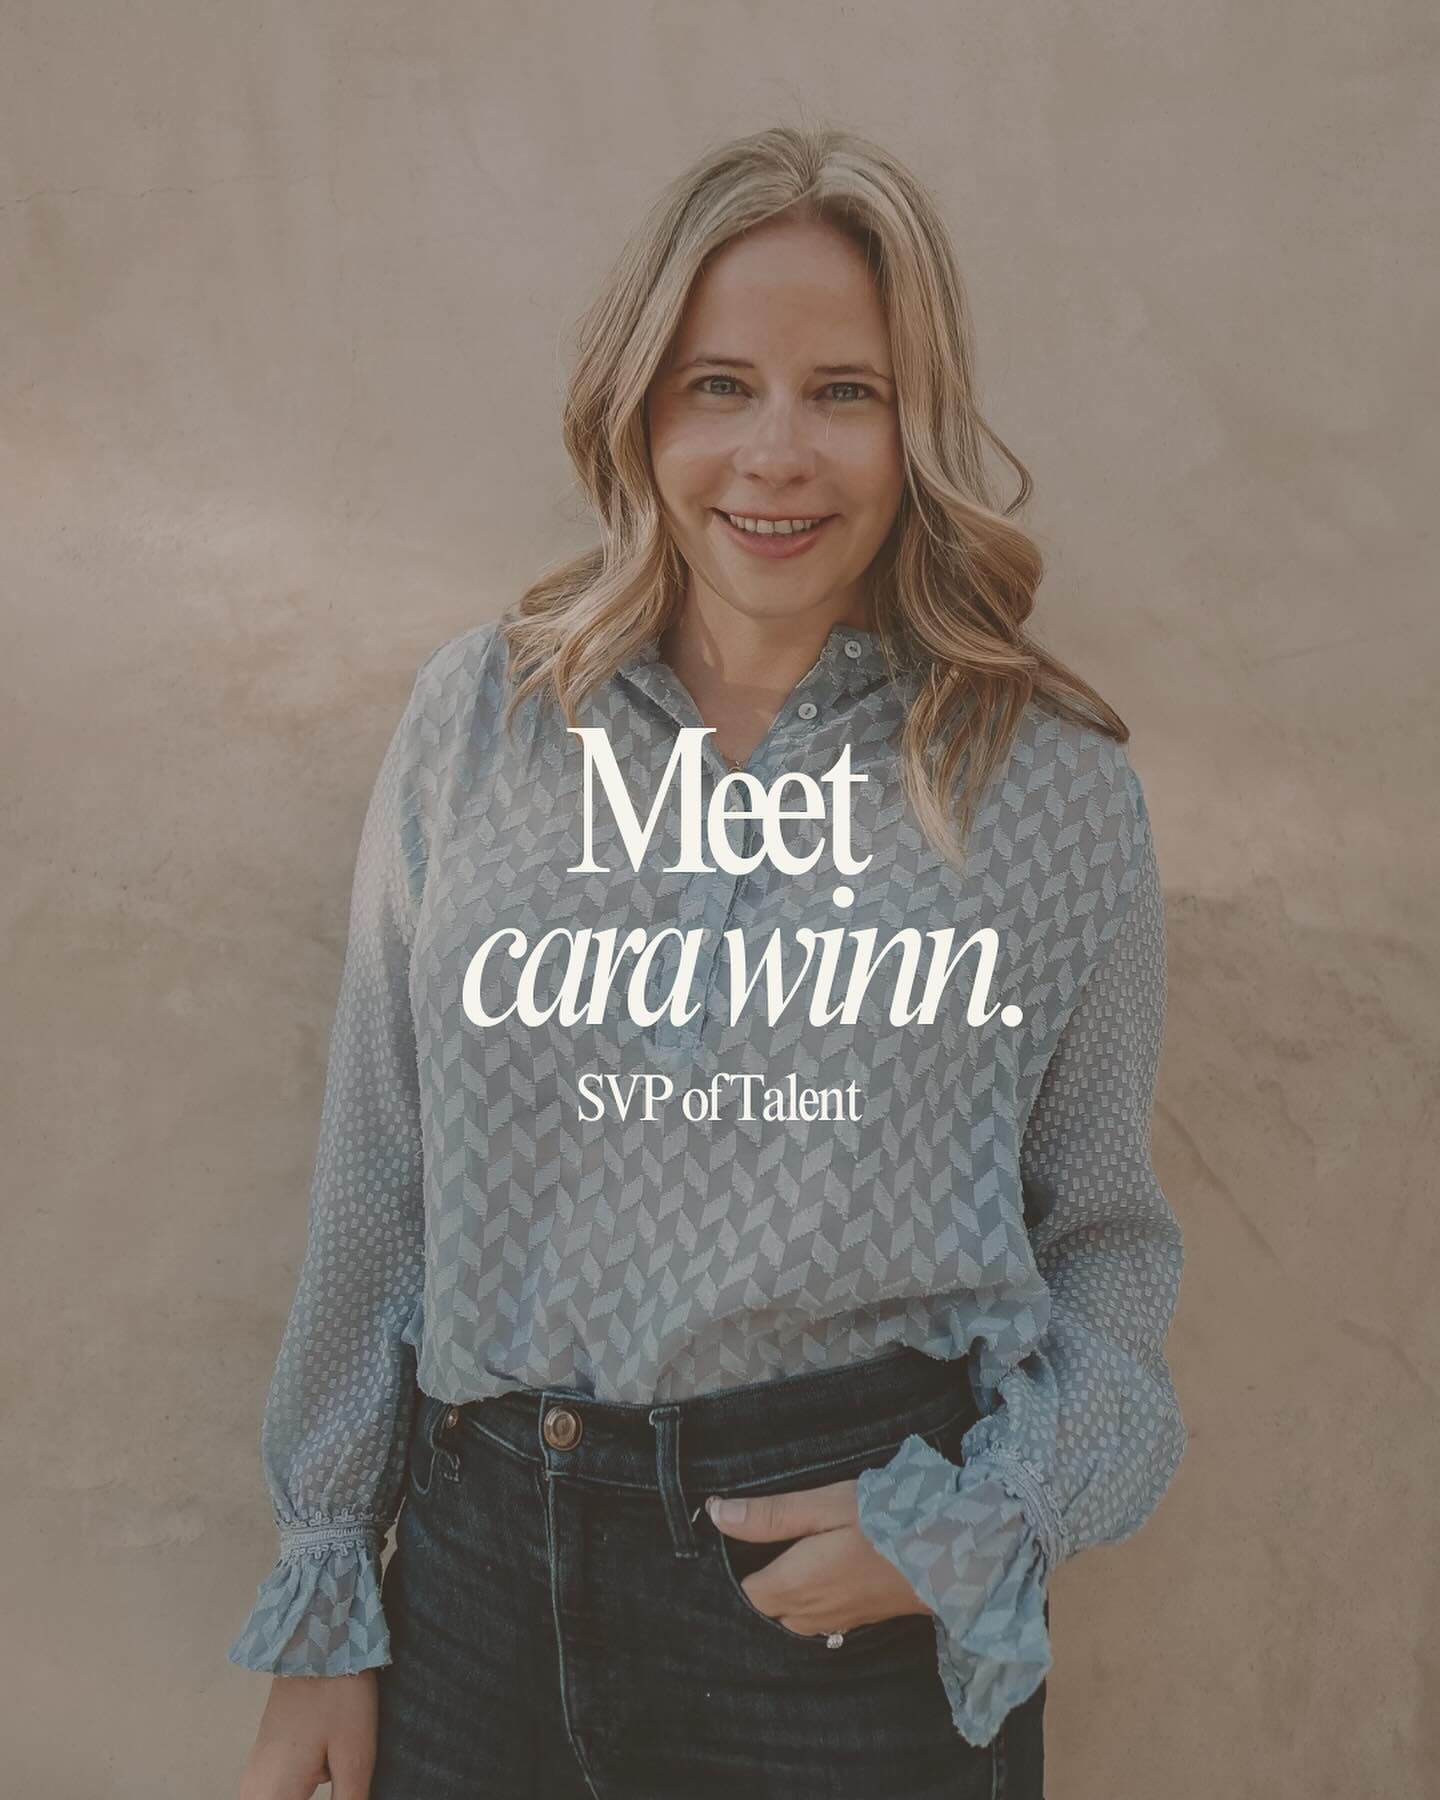 Meet Cara, our SVP of Talent! 

Cara has been working in influencer marketing since 2017, following a seven year editorial career. Cara brings this background to her management style, thinking of each creator as their own &ldquo;magazine.&rdquo; She 